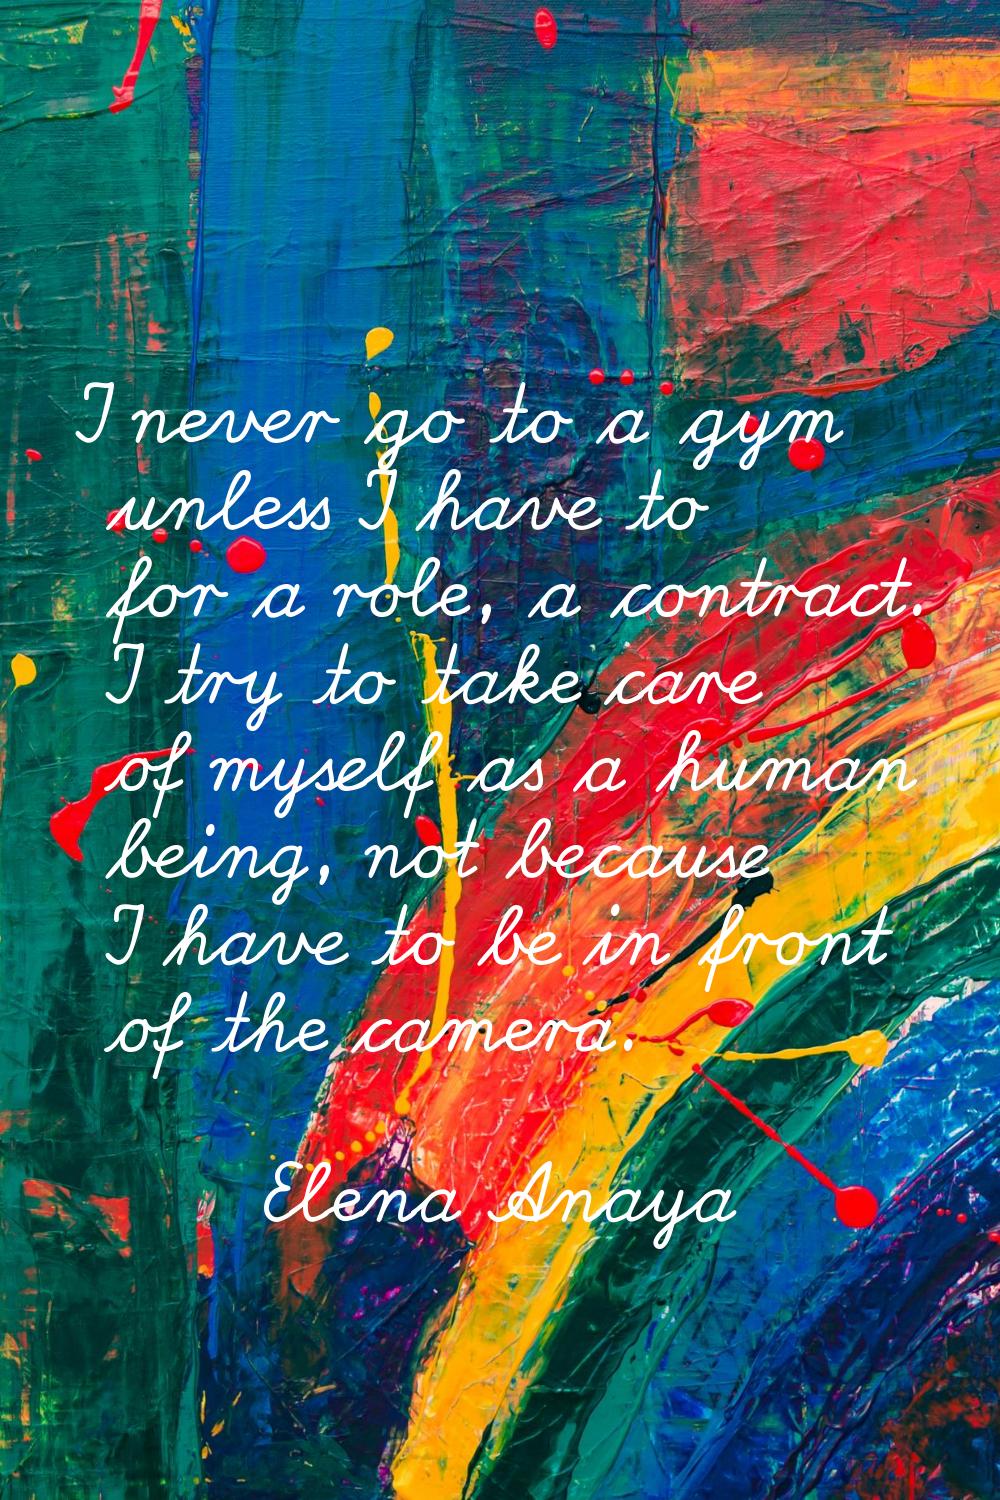 I never go to a gym unless I have to for a role, a contract. I try to take care of myself as a huma